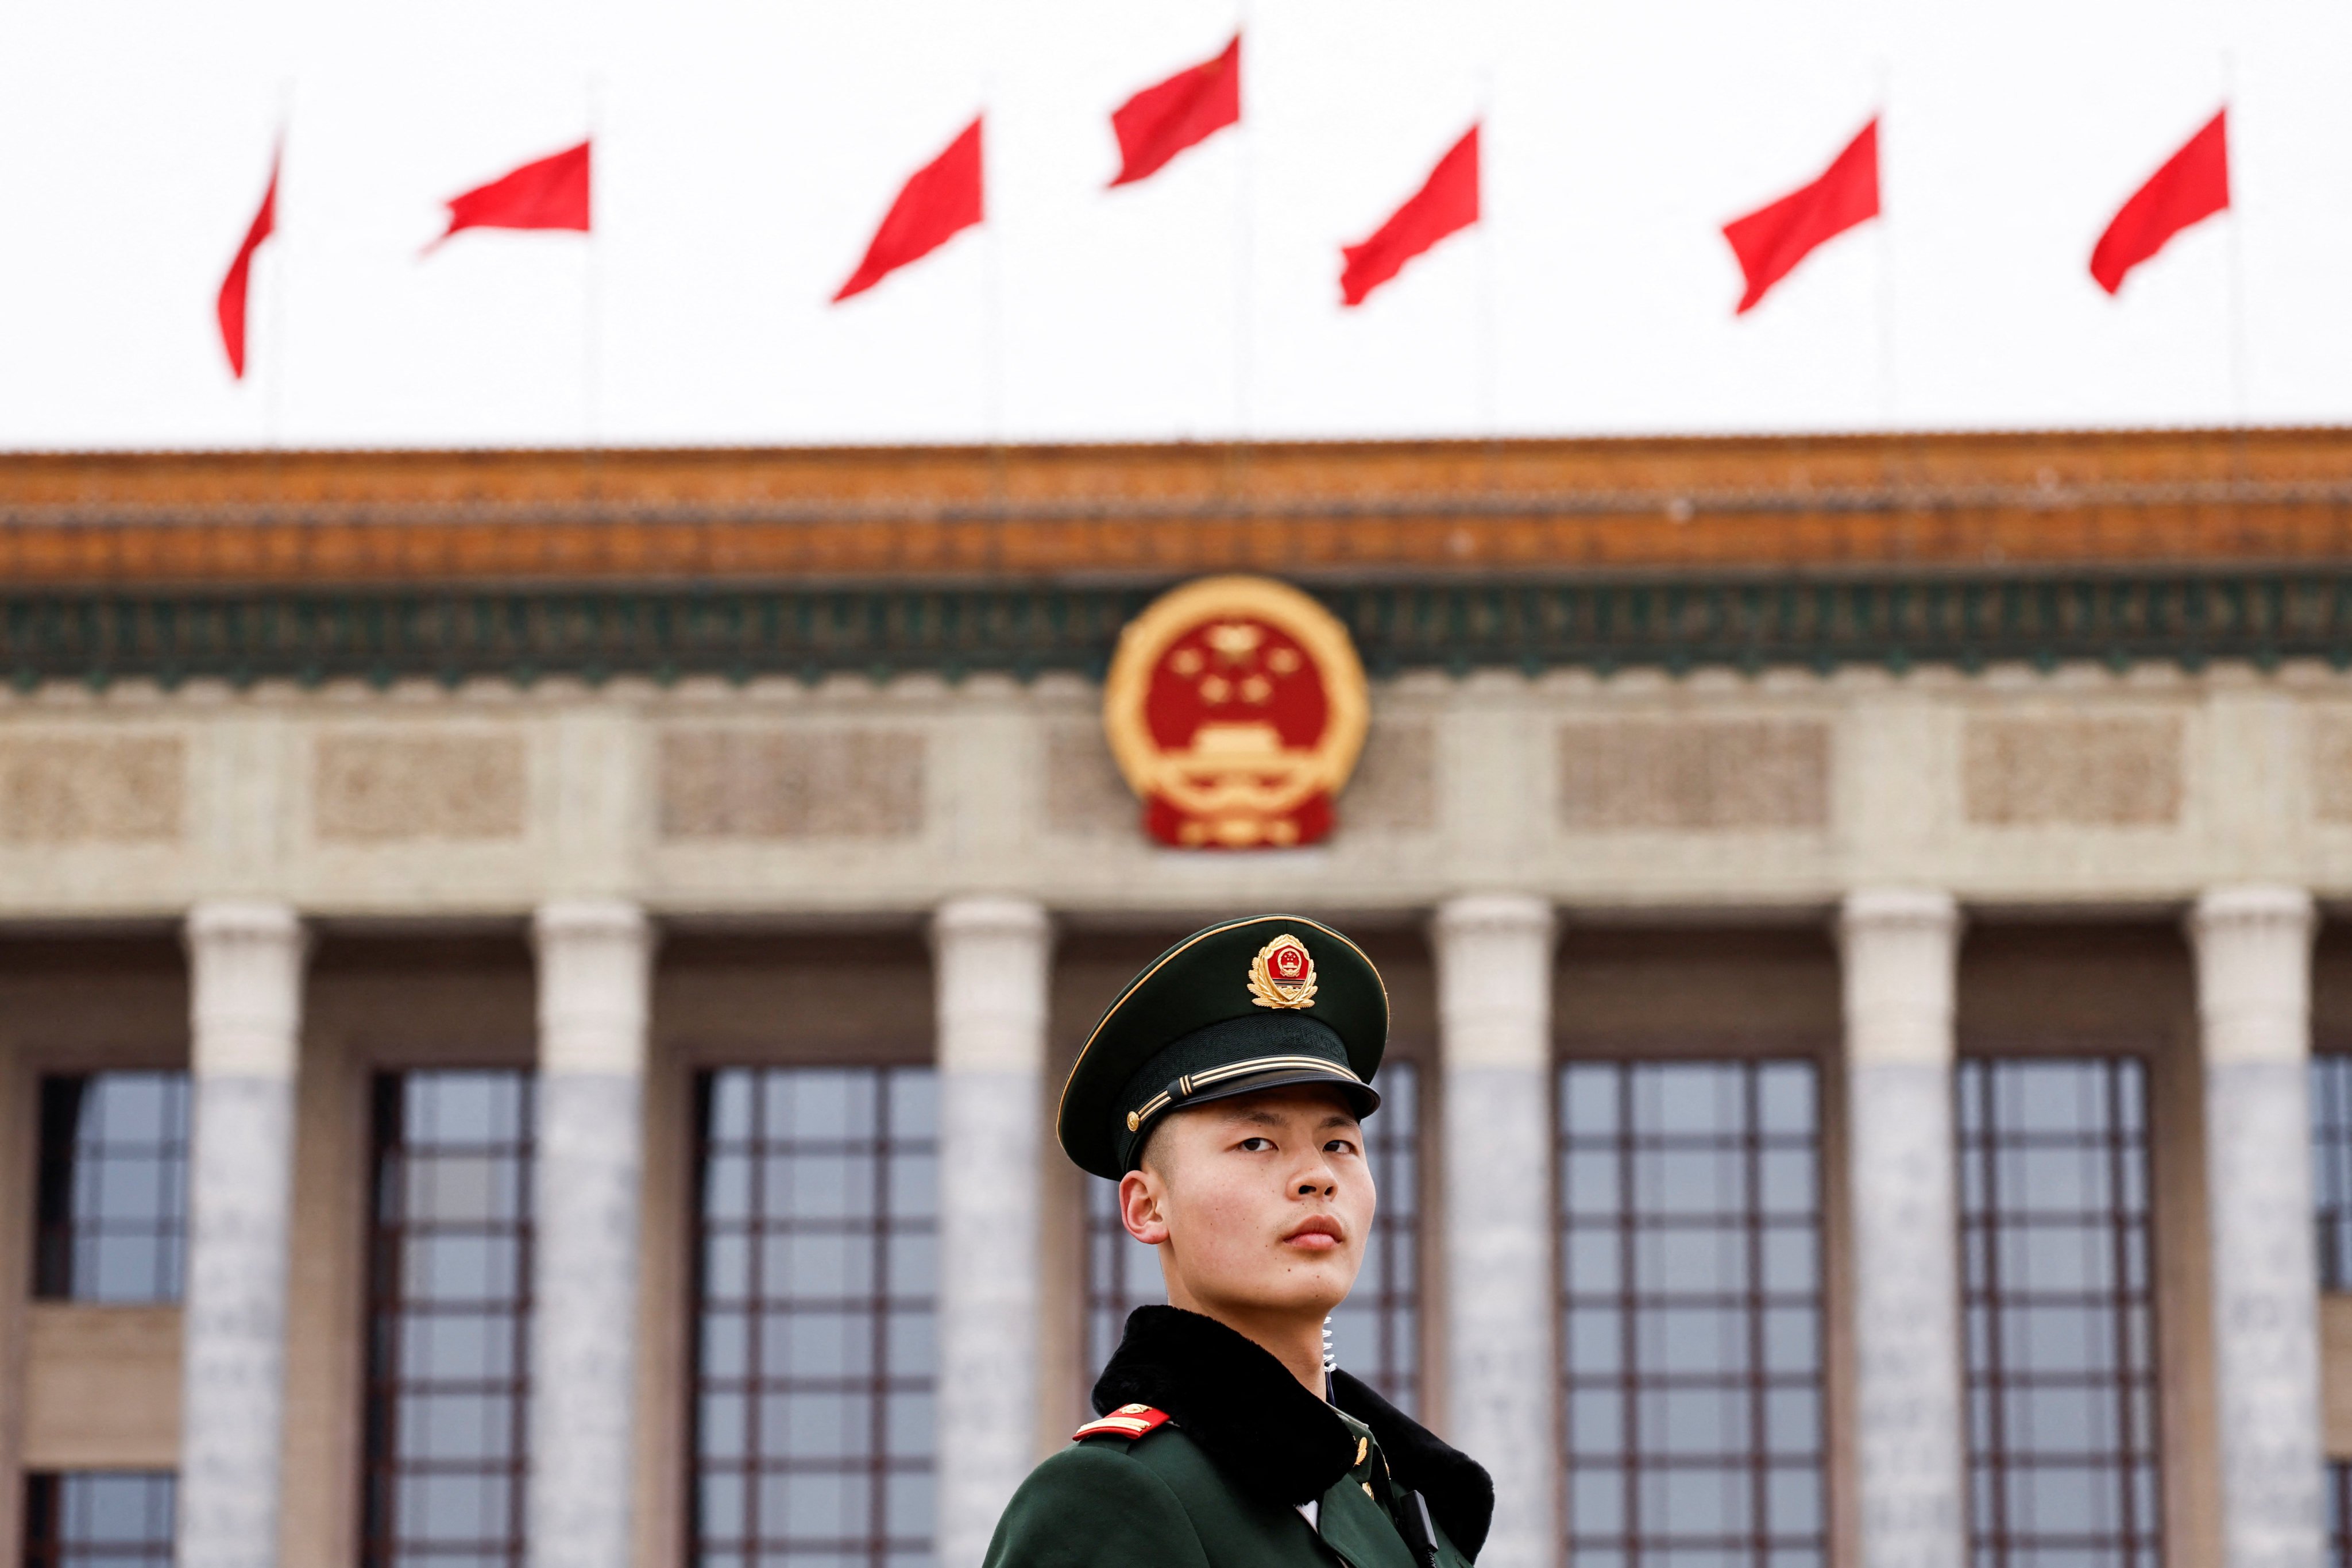 A paramilitary police officer stands guard on the day of the opening session of the Chinese People’s Political Consultative Conference in front of the Great Hall of the People in Beijing on Monday. Photo: Reuters